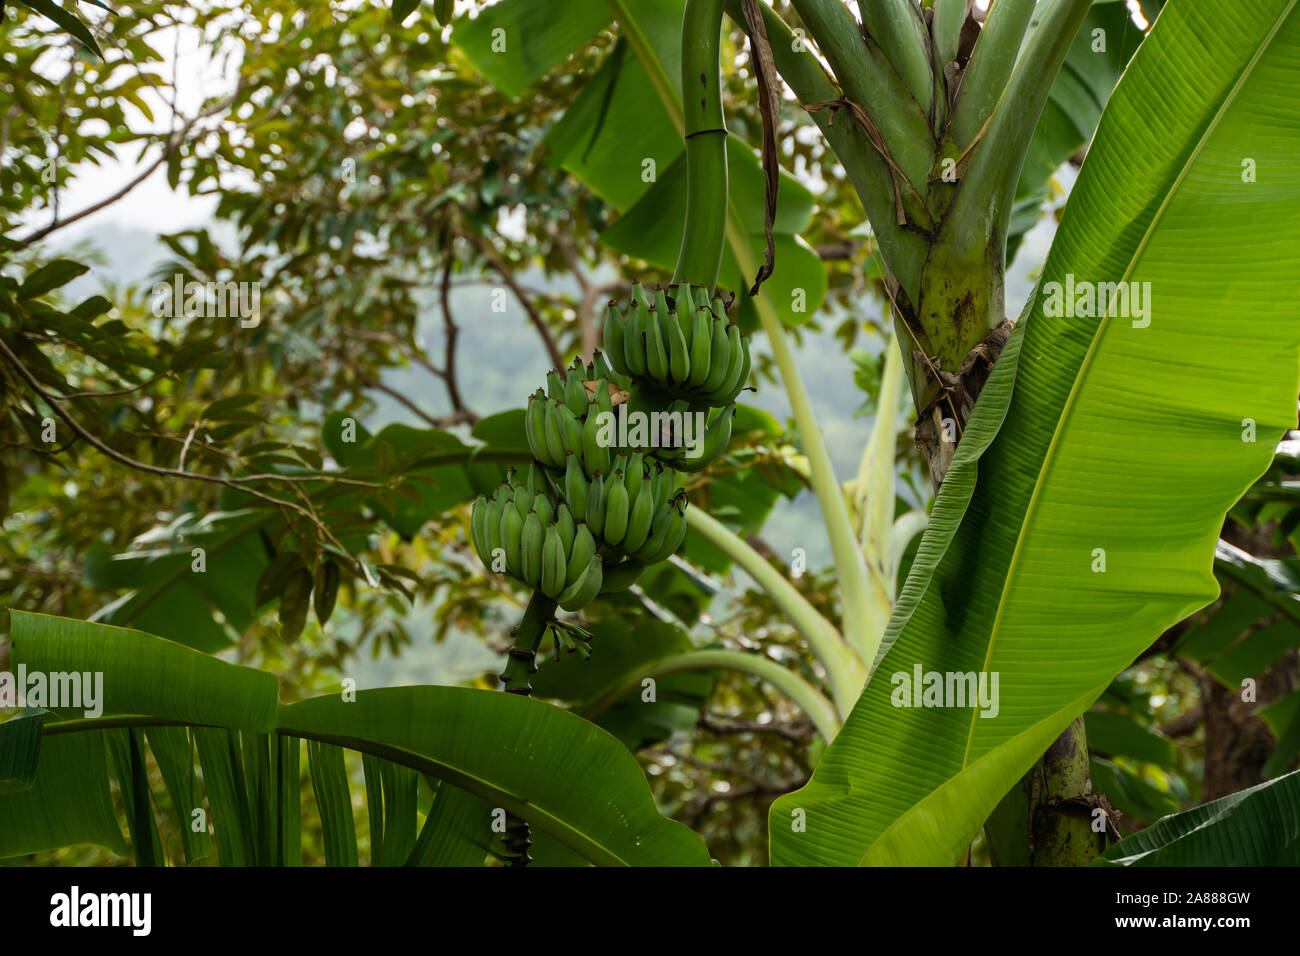 Babana tree in the garden. Green Raw Organic Banana Cluster hanging down from trees in a bunch, bunch of babana - bananas. The banana tree and a lot Stock Photo